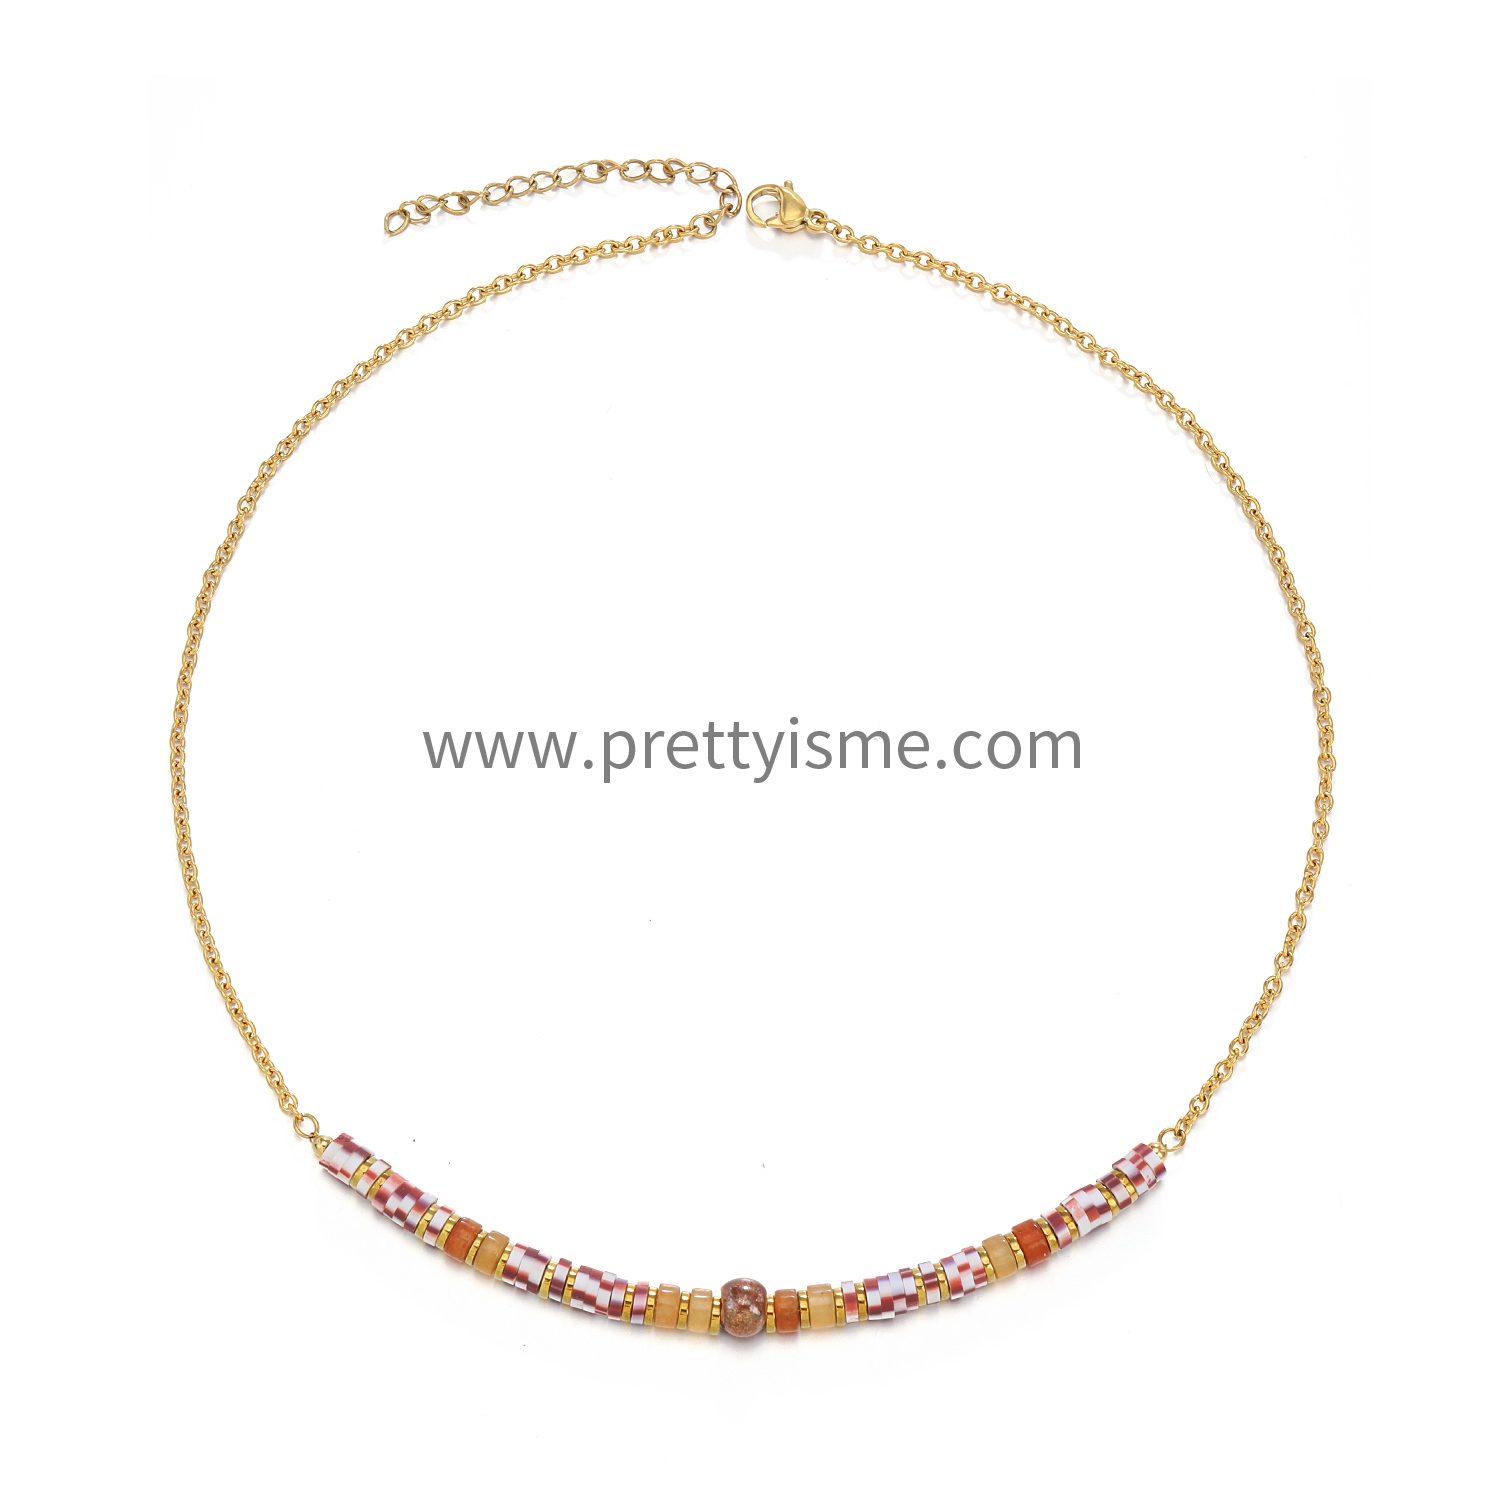 Pretty Is Me Collection Tarnish Free 18K Gold Vacuum Plated Stainless Steel Beads Beaded Polymer Clay Choker Necklace Women (2).webp